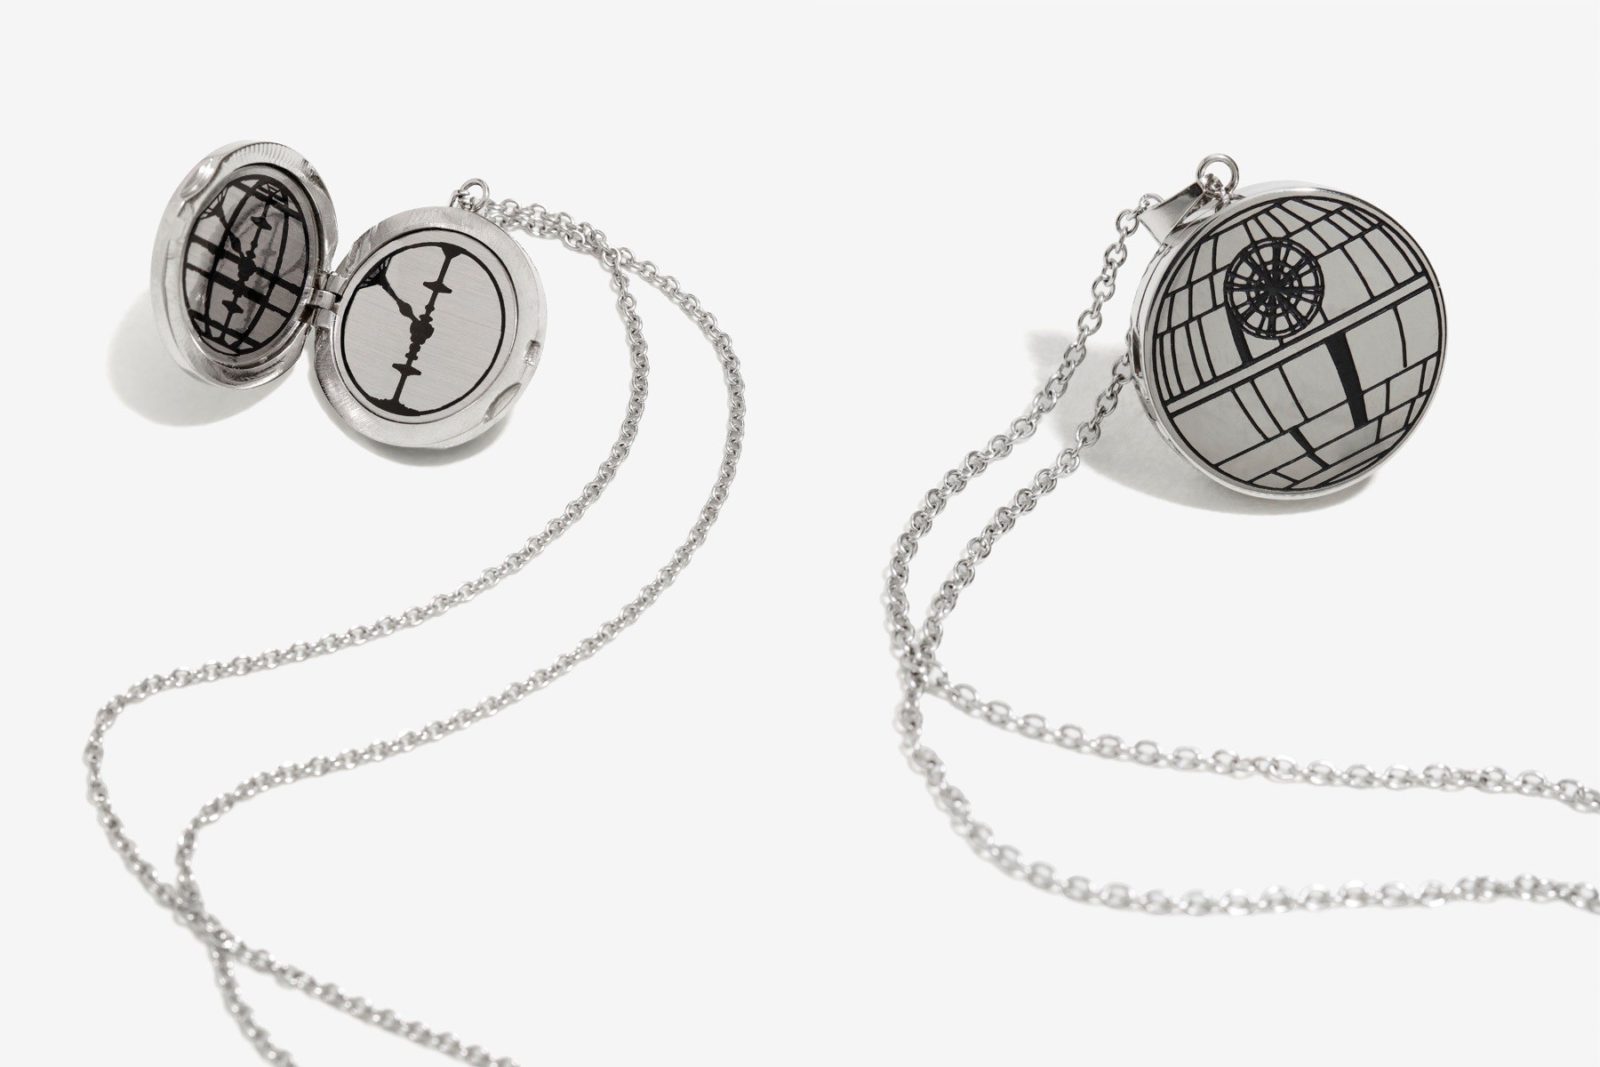 Star Wars Rogue One Death Star locket necklace available at Box Lunch